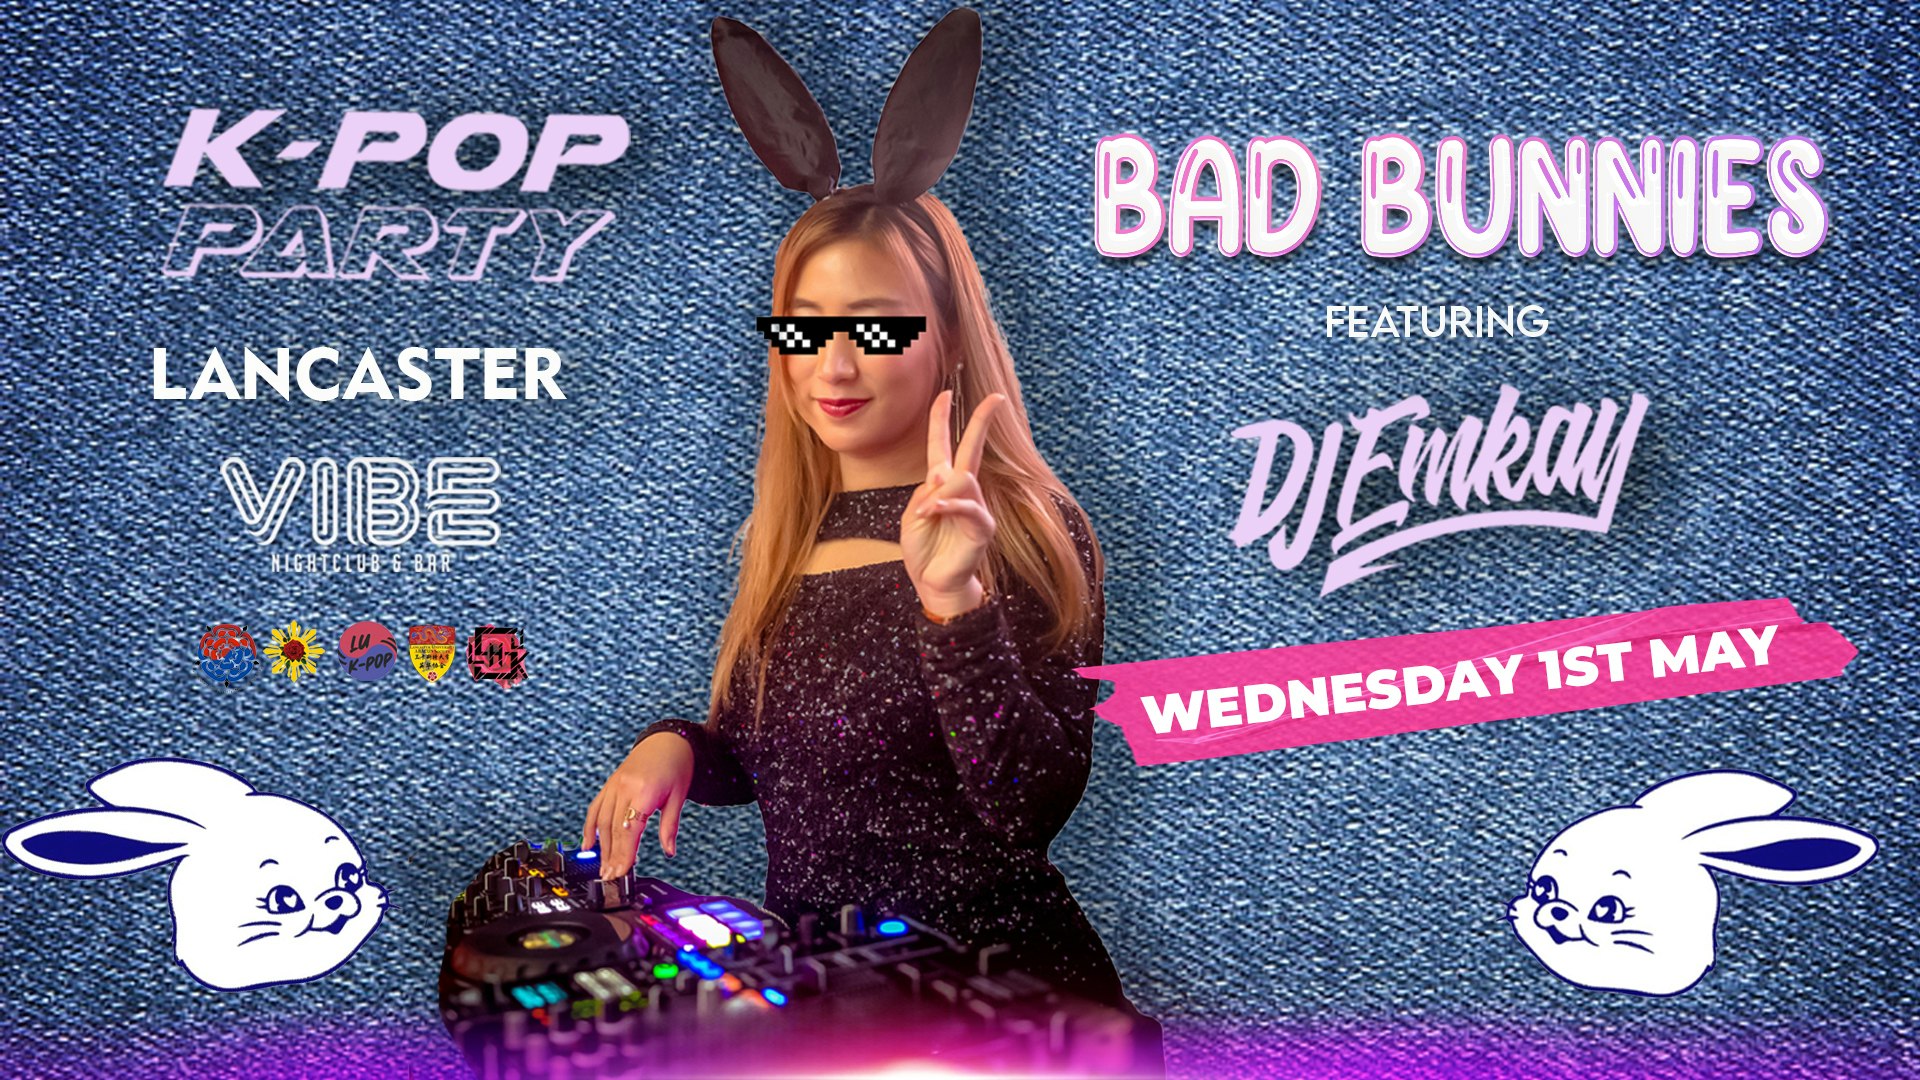 K-Pop BAD BUNNIES Party Lancaster with DJ EMKAY | Wednesday 1st May